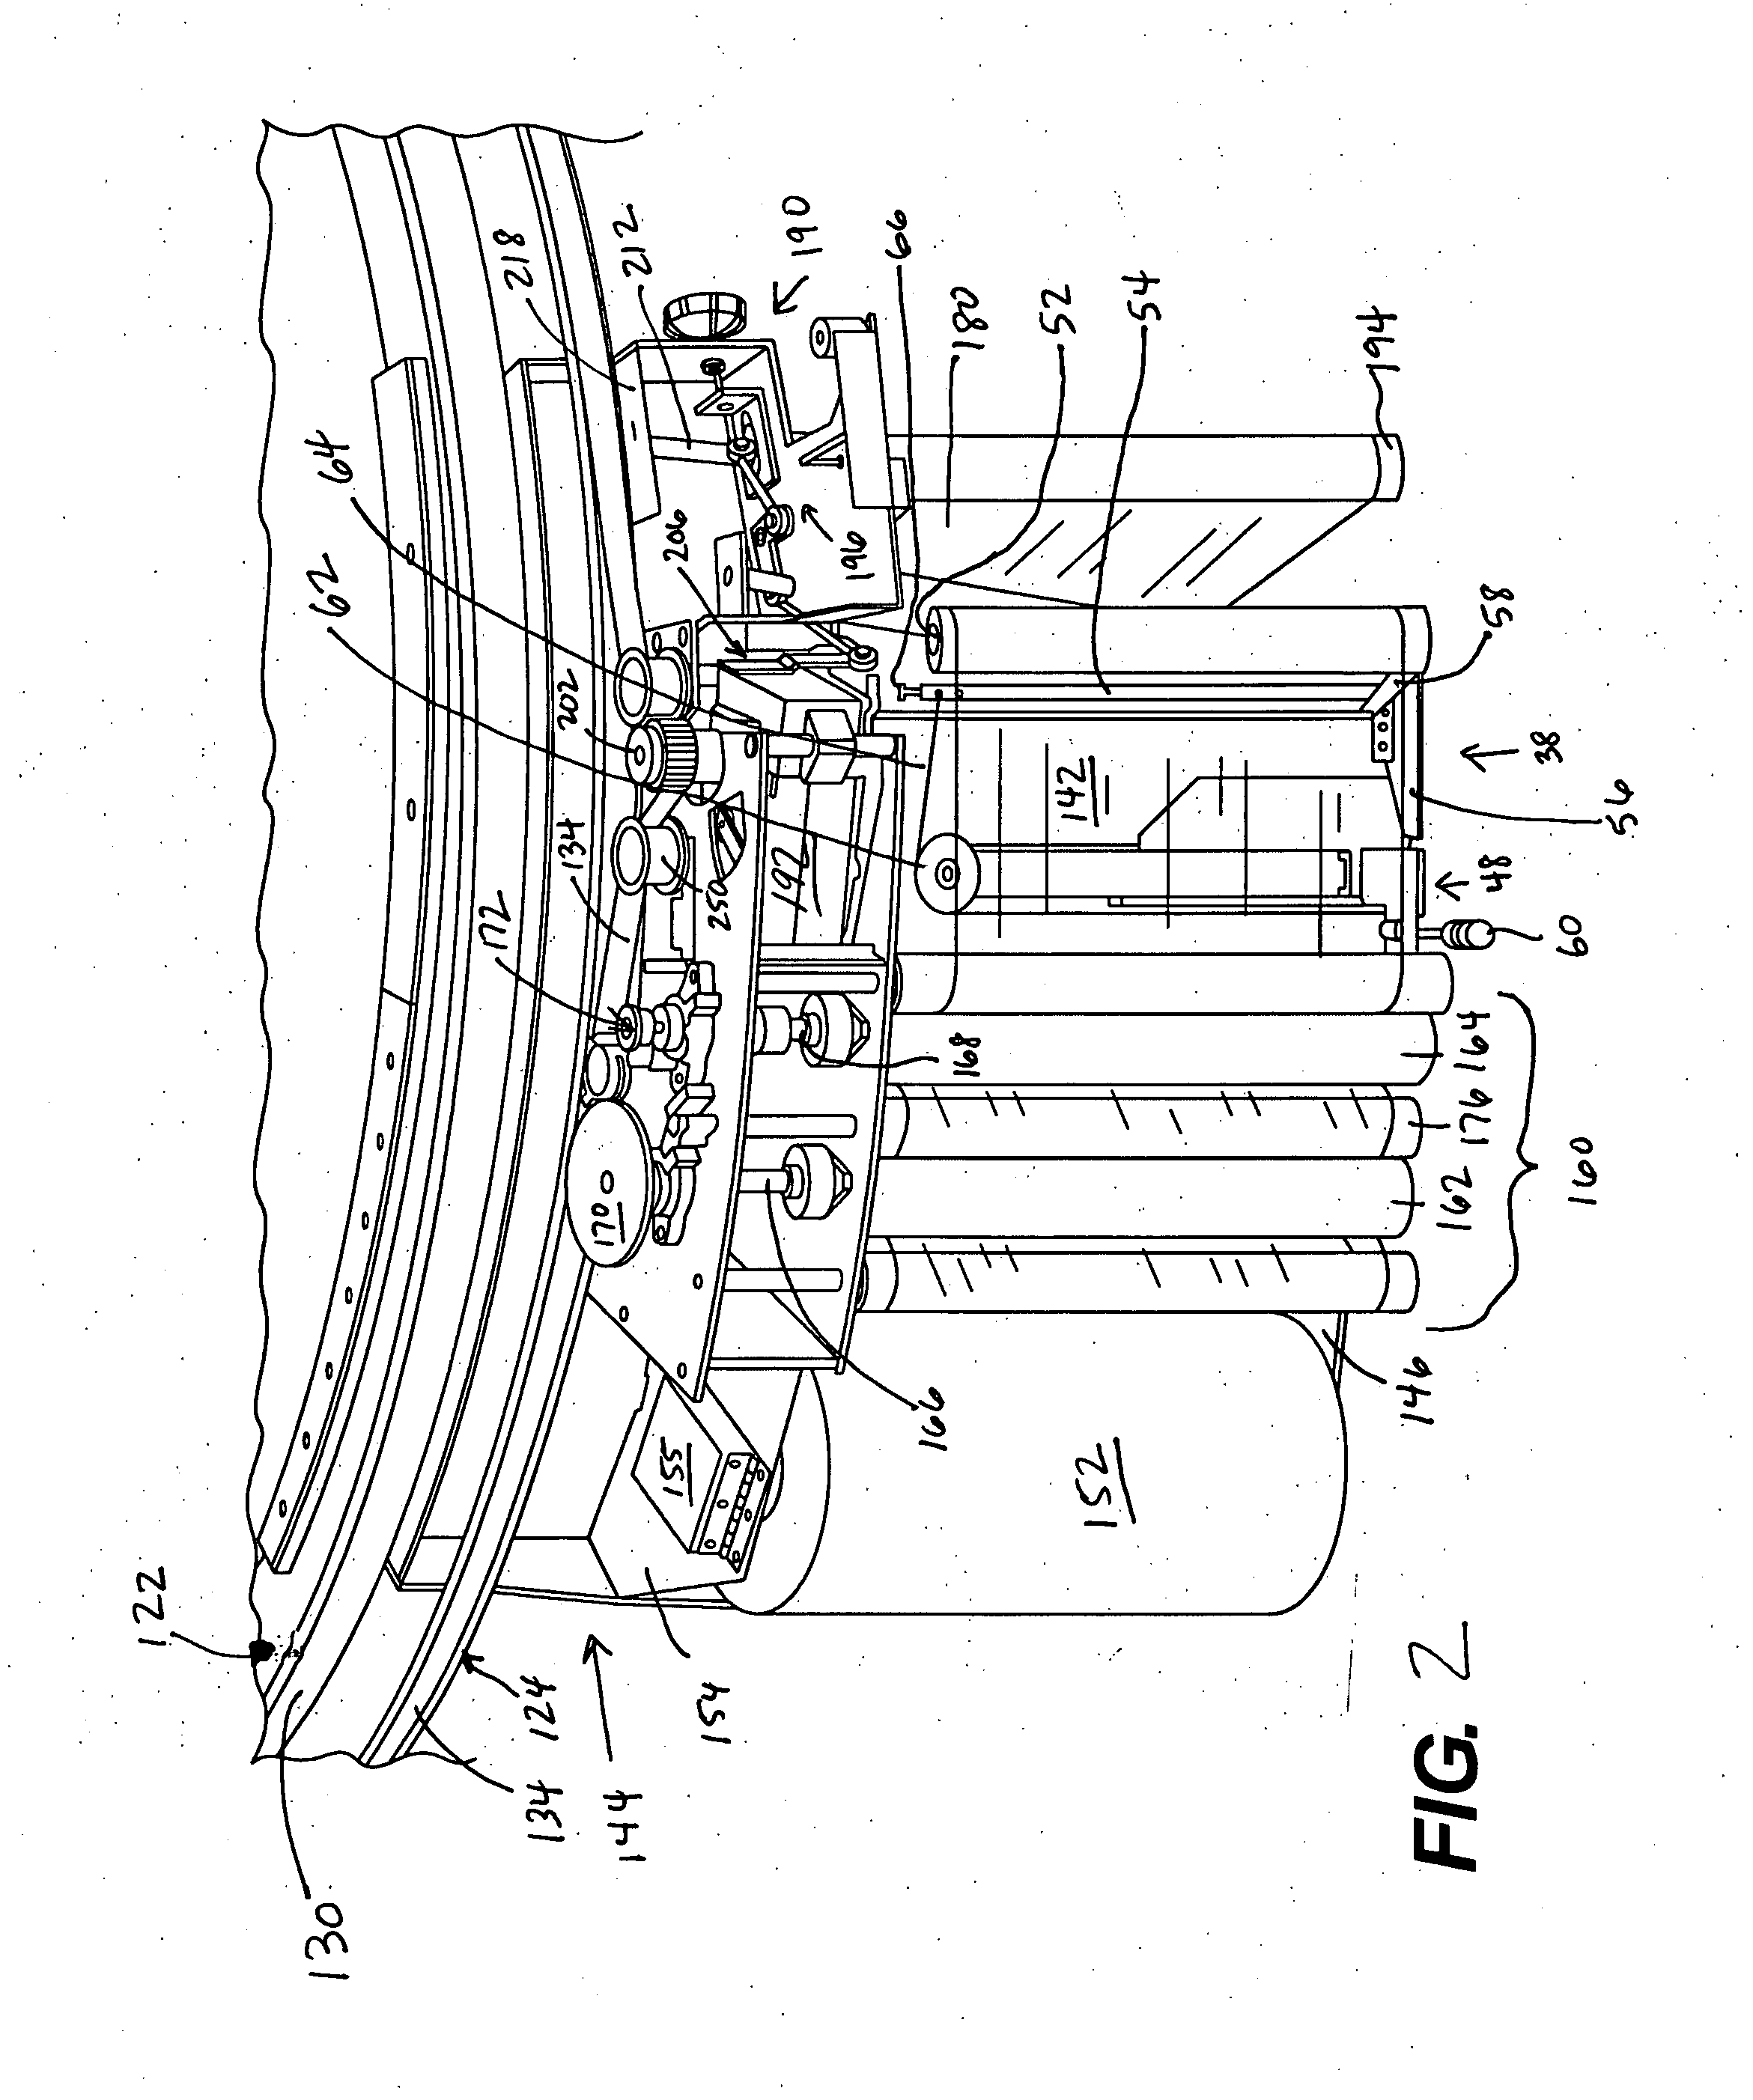 Ring wrapping apparatus including metered pre-stretch film delivery assembly